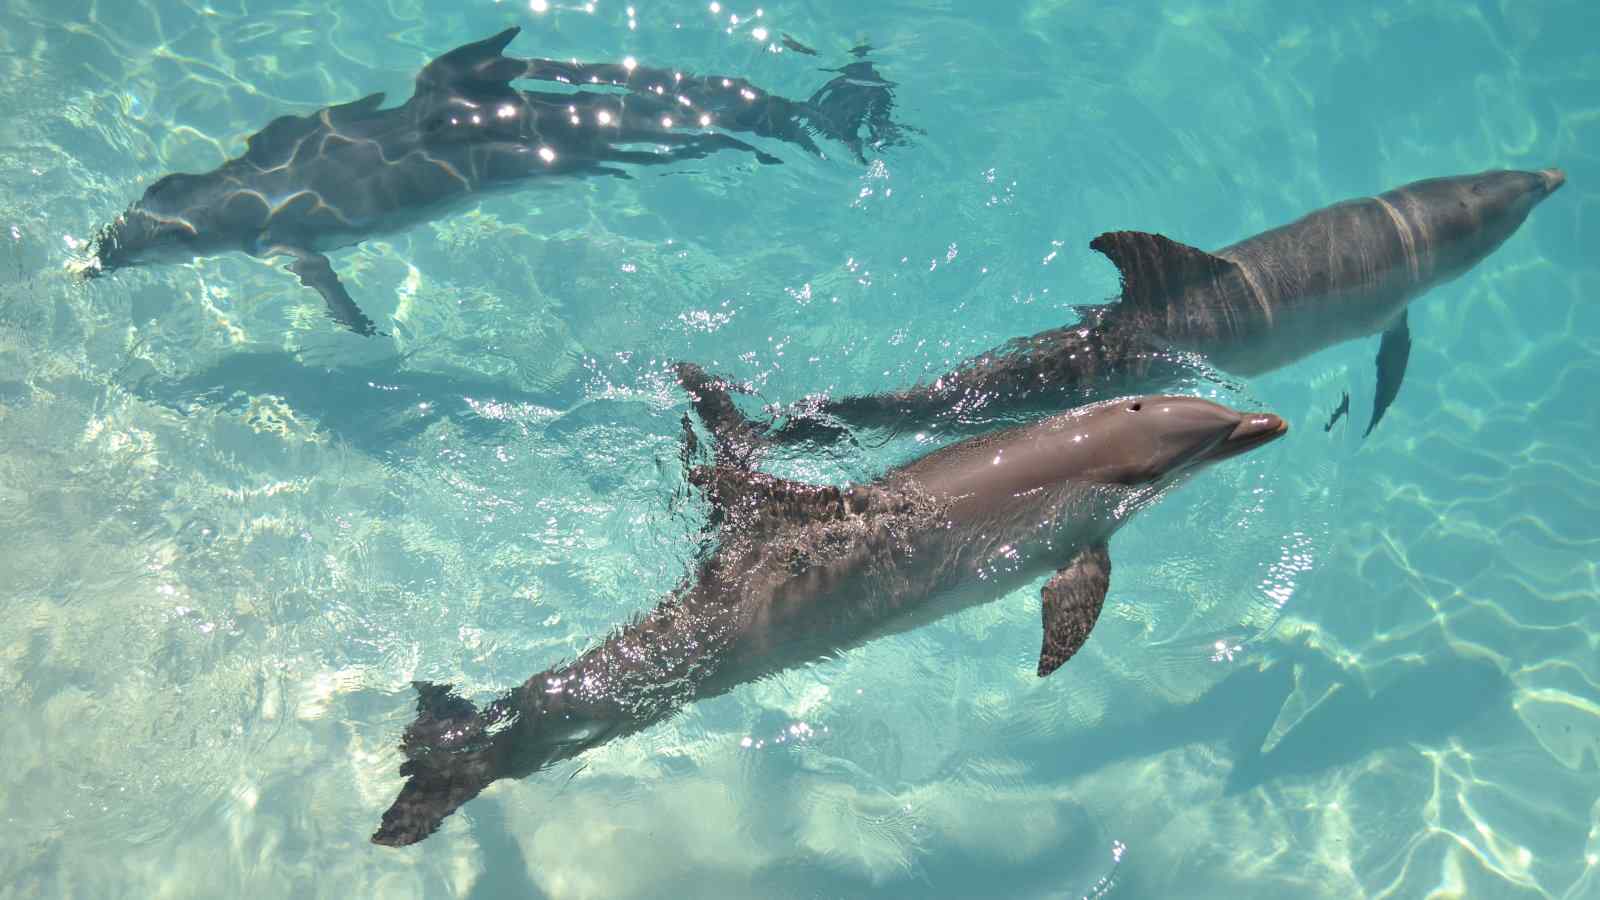 There's lots to do in Cancun, like seeing wild dolphins!